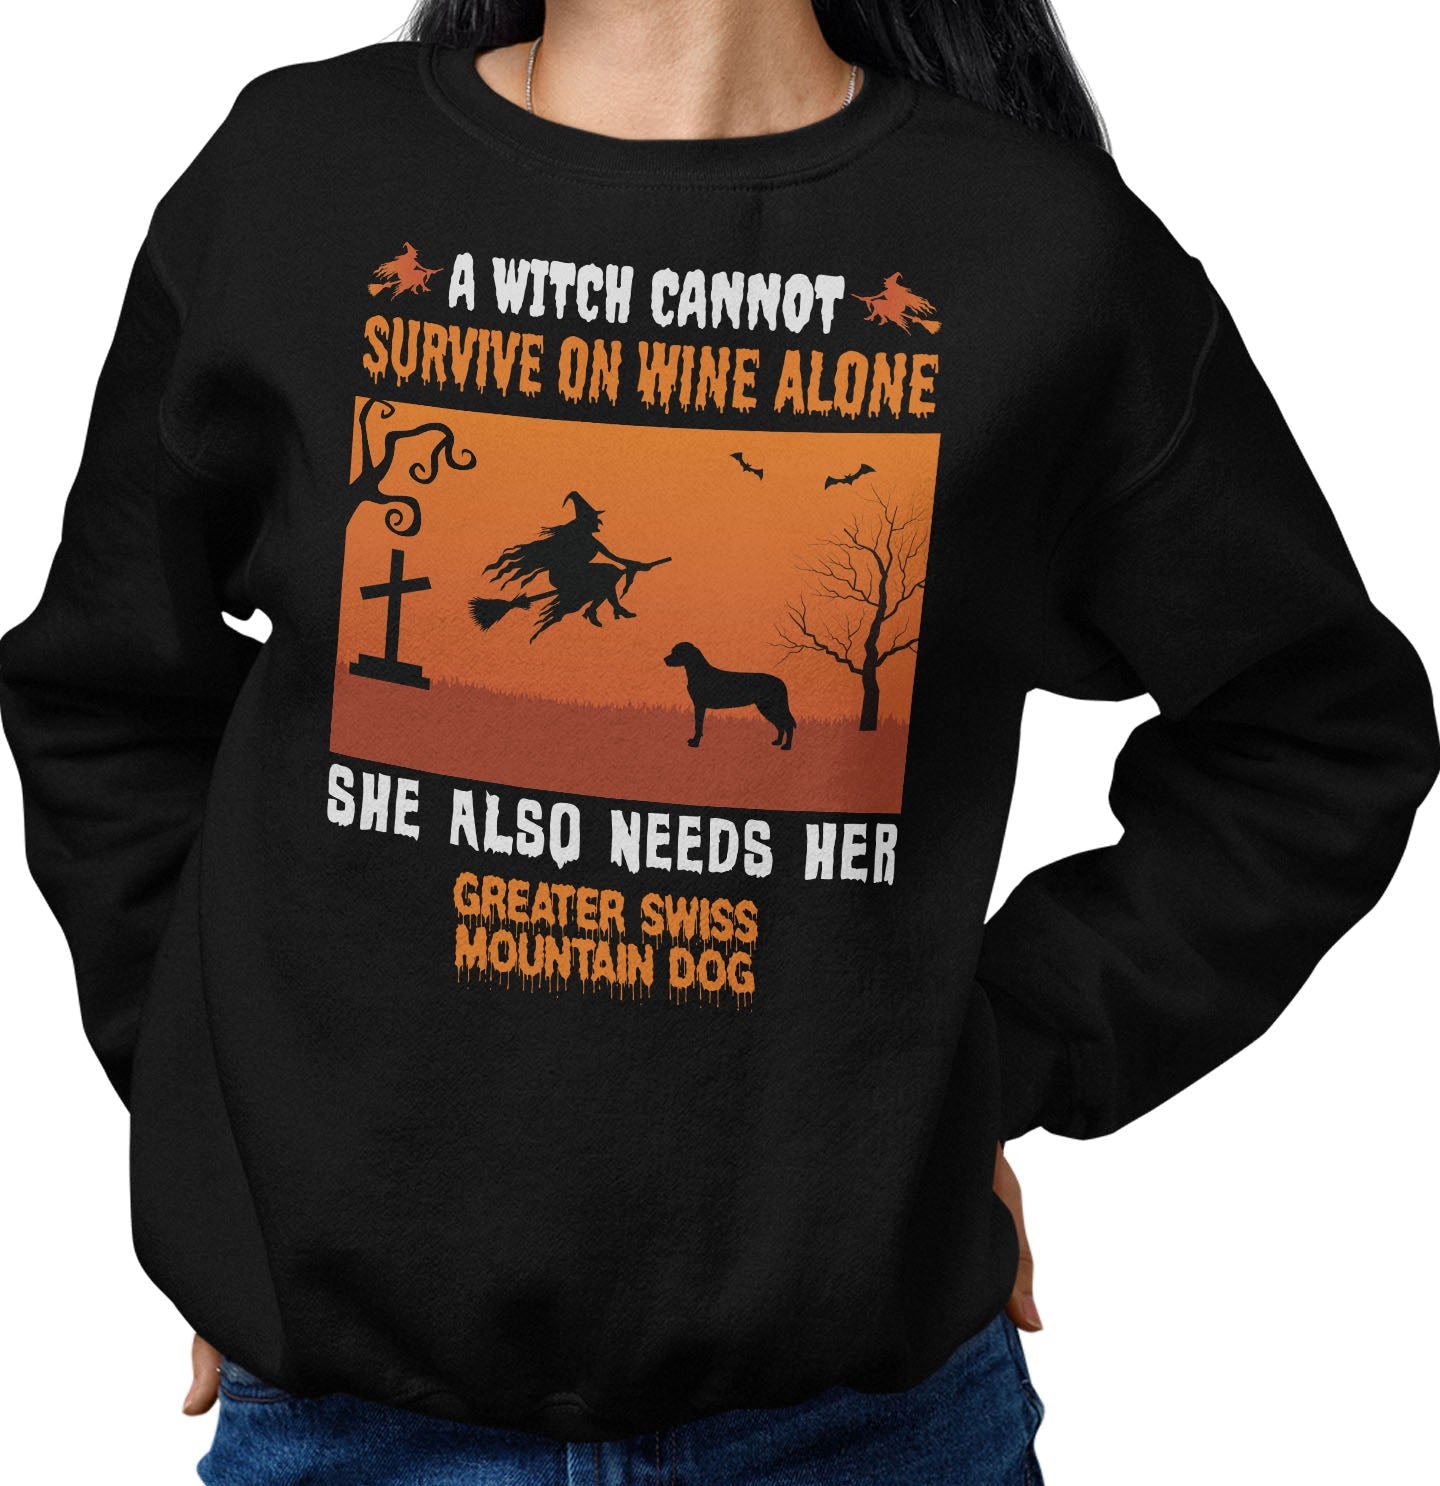 A Witch Needs Her Greater Swiss Mountain Dog - Adult Unisex Crewneck Sweatshirt